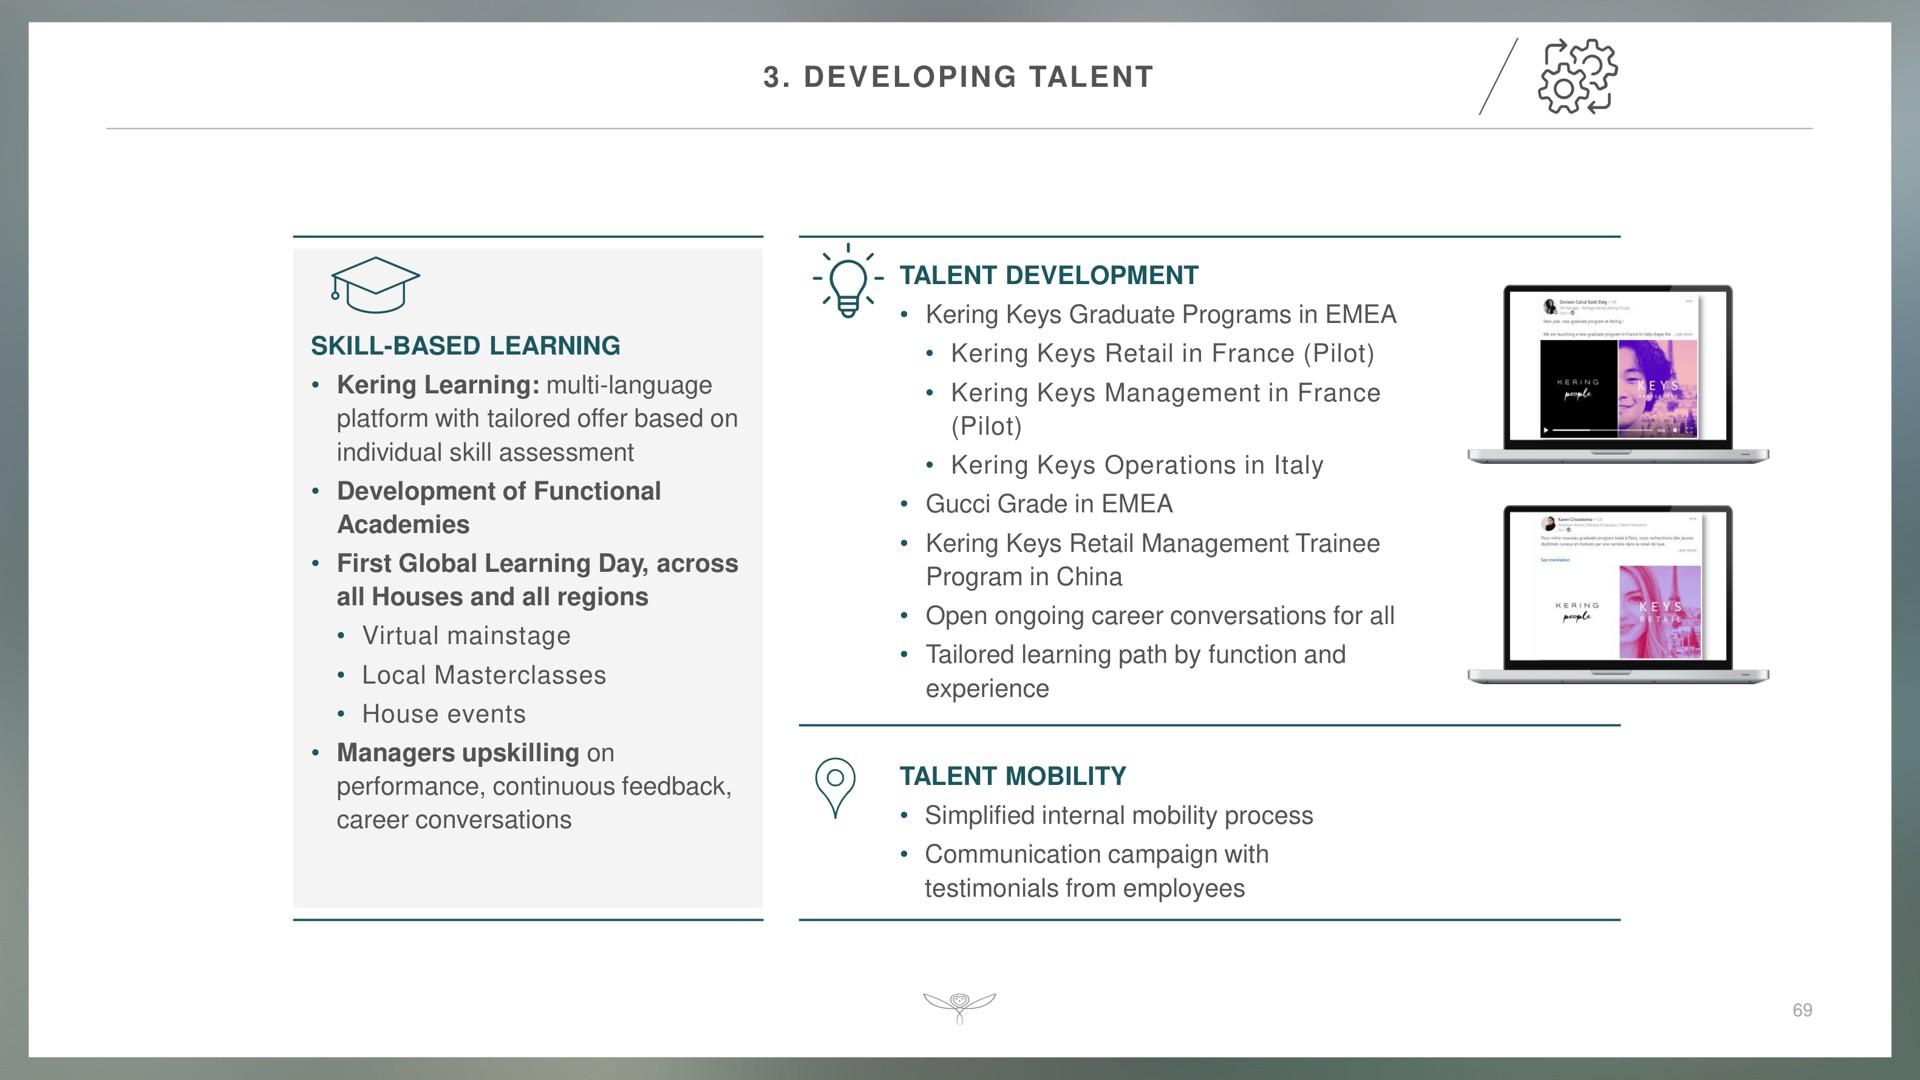 developing talent skill based learning learning language platform with tailored offer based on individual skill assessment development of functional academies first global learning day across all houses and all regions virtual local house events managers on performance continuous feedback career conversations talent development keys graduate programs in keys retail in pilot keys management in pilot keys operations in grade in keys retail management trainee program in china open ongoing career conversations for all tailored learning path by function and experience talent mobility simplified internal mobility process communication campaign with testimonials from employees | Kering